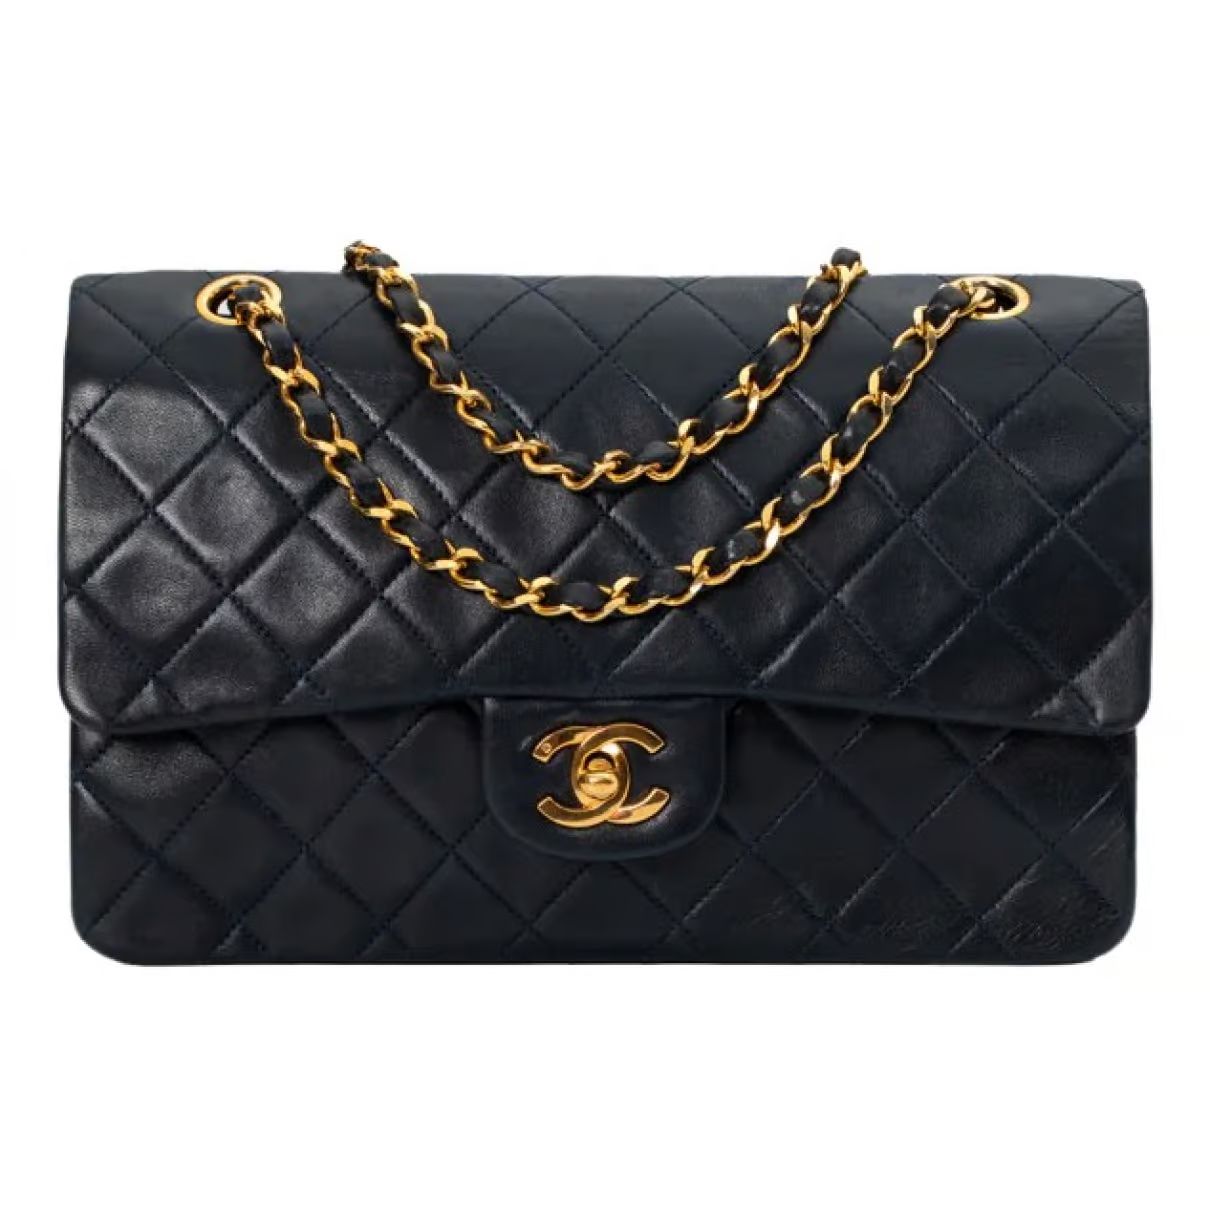 Timeless/classique leather handbag Chanel Blue in Leather - 36455211 | Vestiaire Collective (Global)